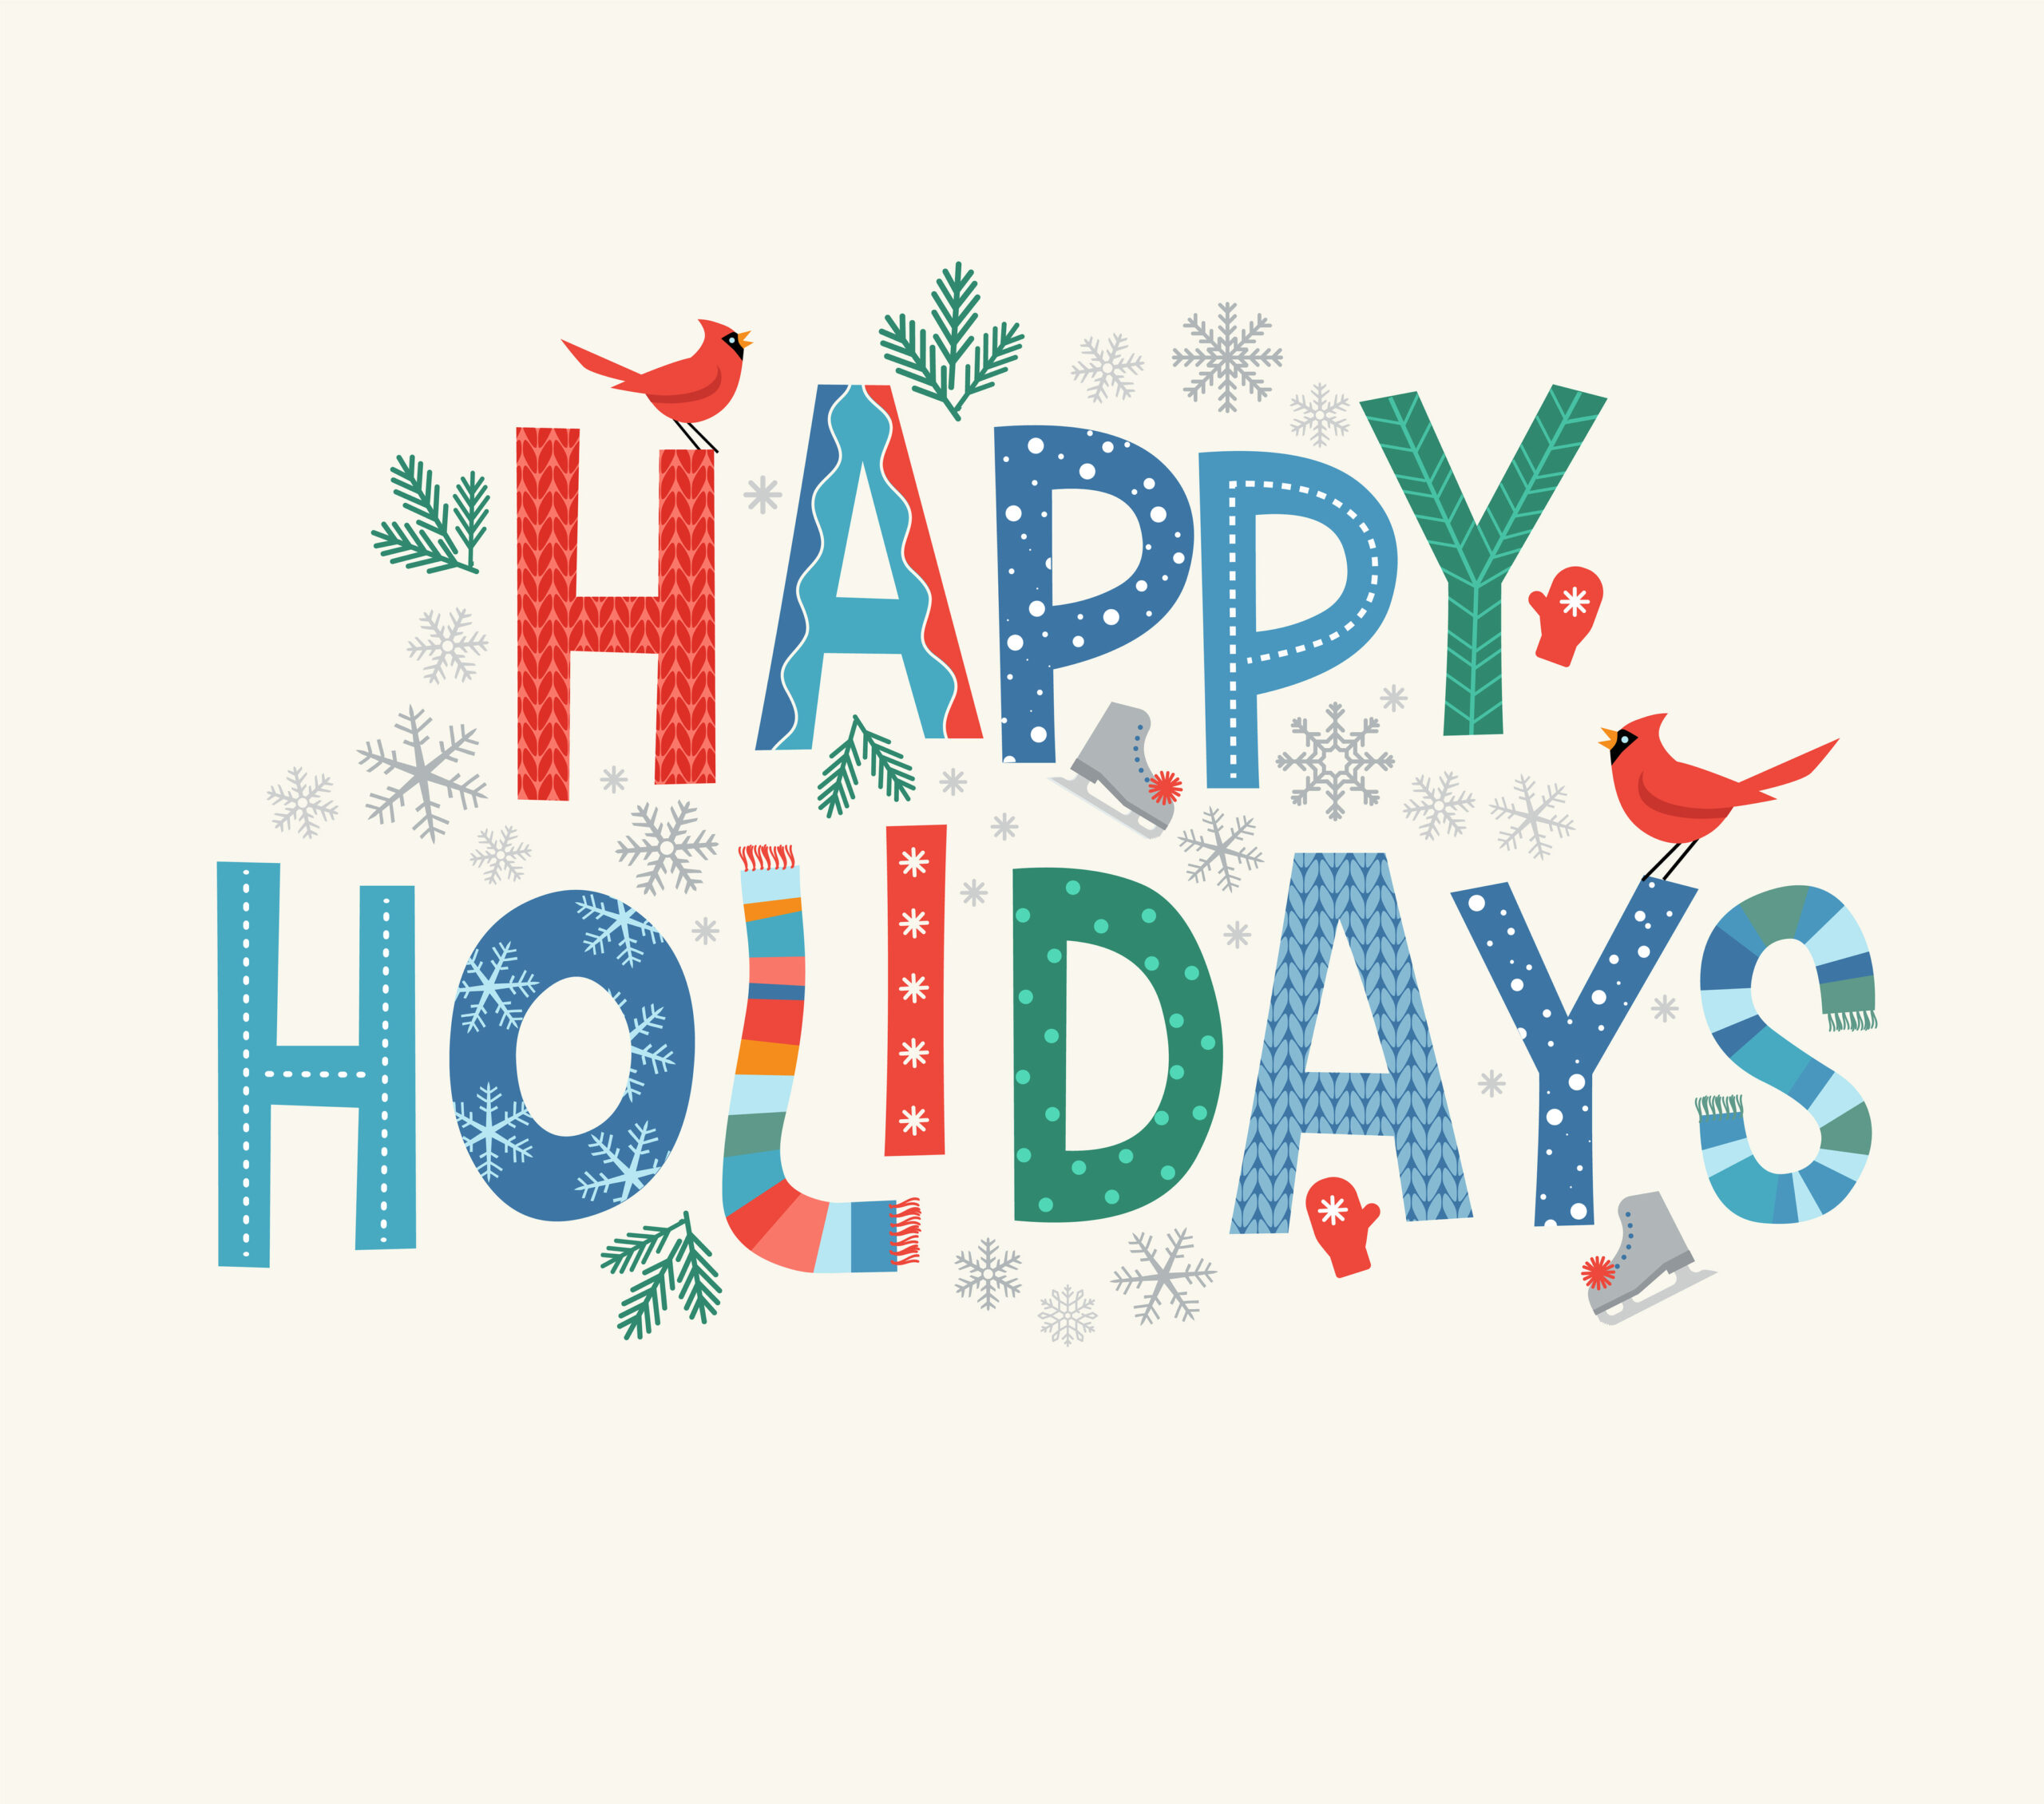 Longmont Orthodontics extends warm wishes of joy and happiness to our valued patients and the Longmont community.